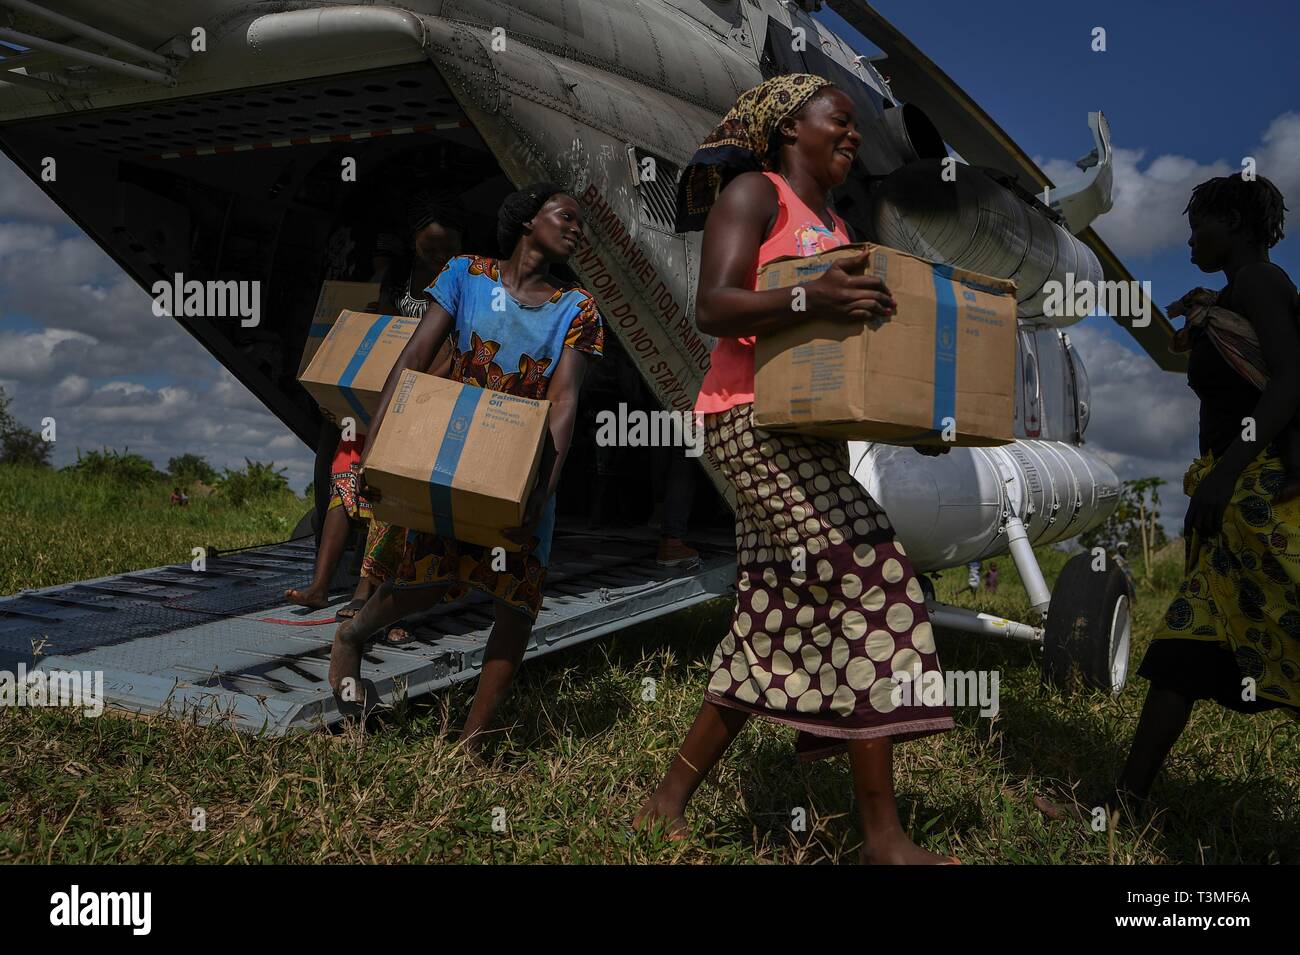 Local volunteers assist in unloading food aid from a helicopter in the aftermath of the massive Cyclone Idai April 8, 2019 in Bebedo, Mozambique. The World Food Programme, with help from the U.S. Air Force is transporting emergency relief supplies to assist the devastated region. Stock Photo